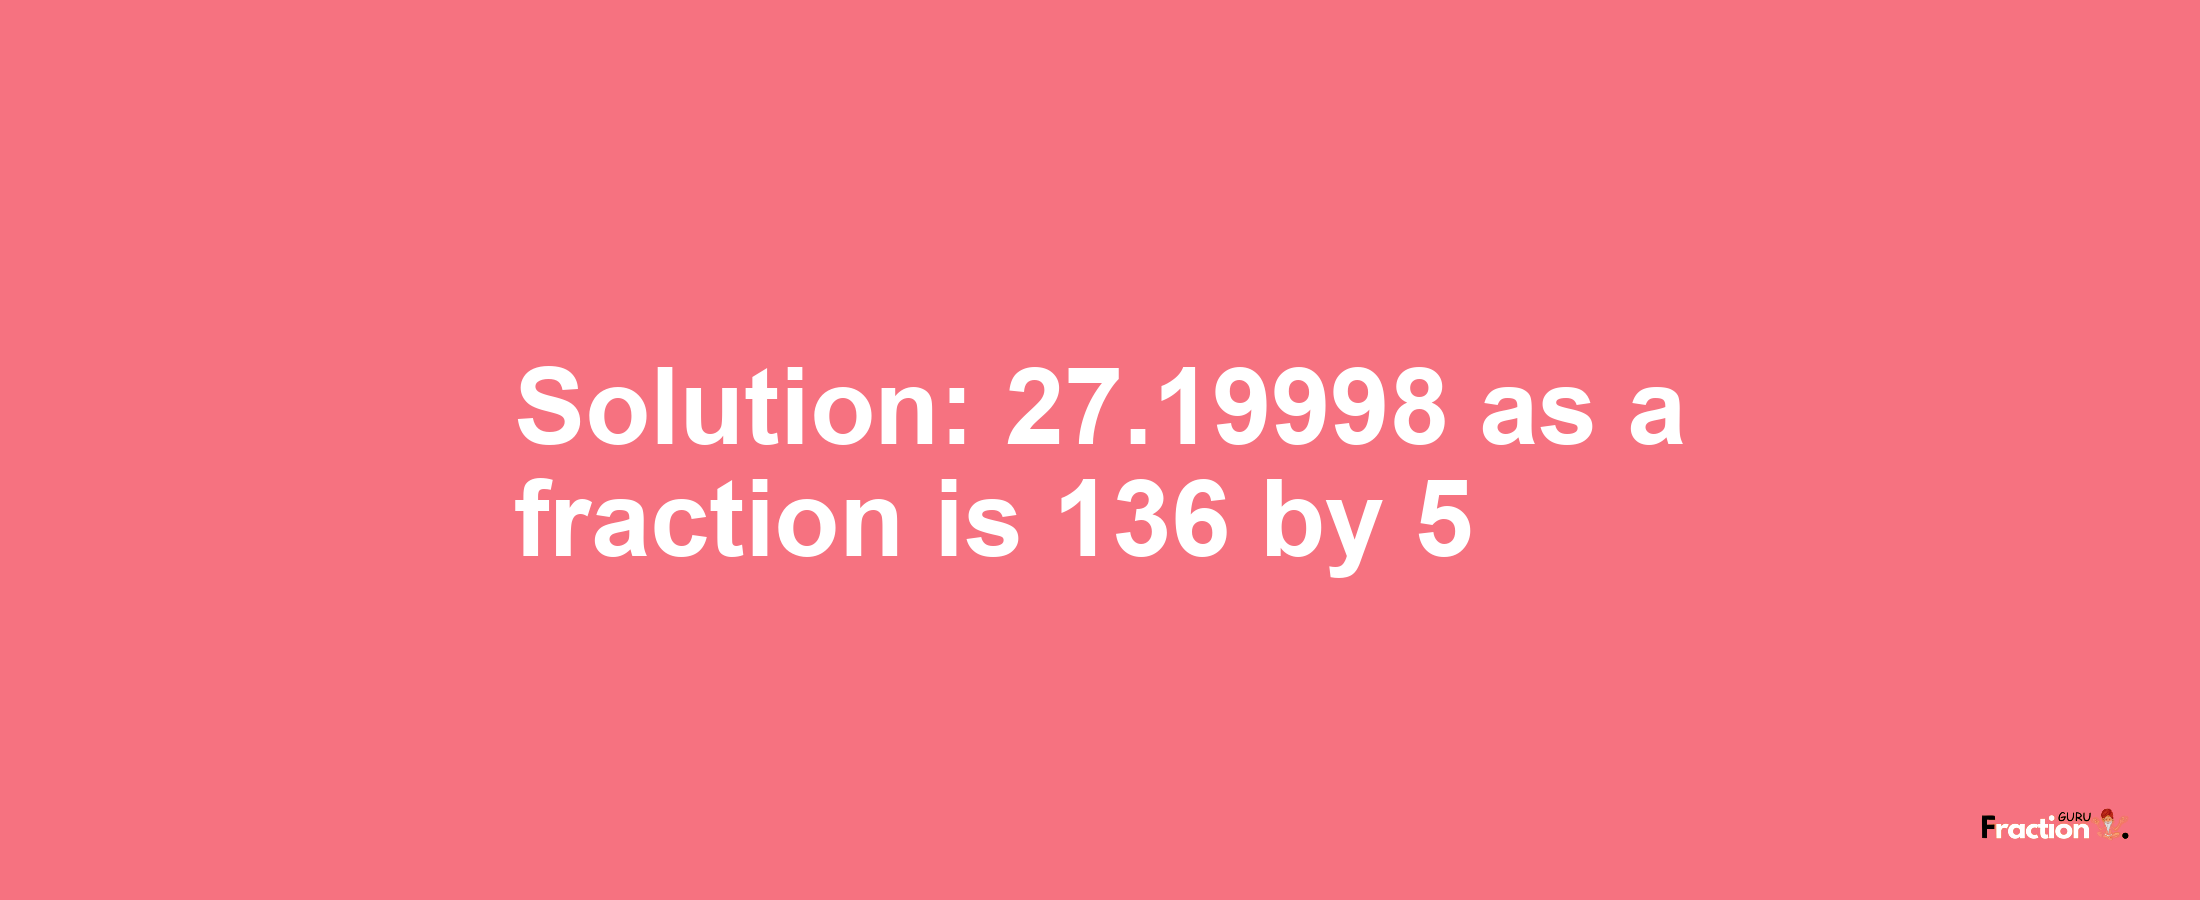 Solution:27.19998 as a fraction is 136/5